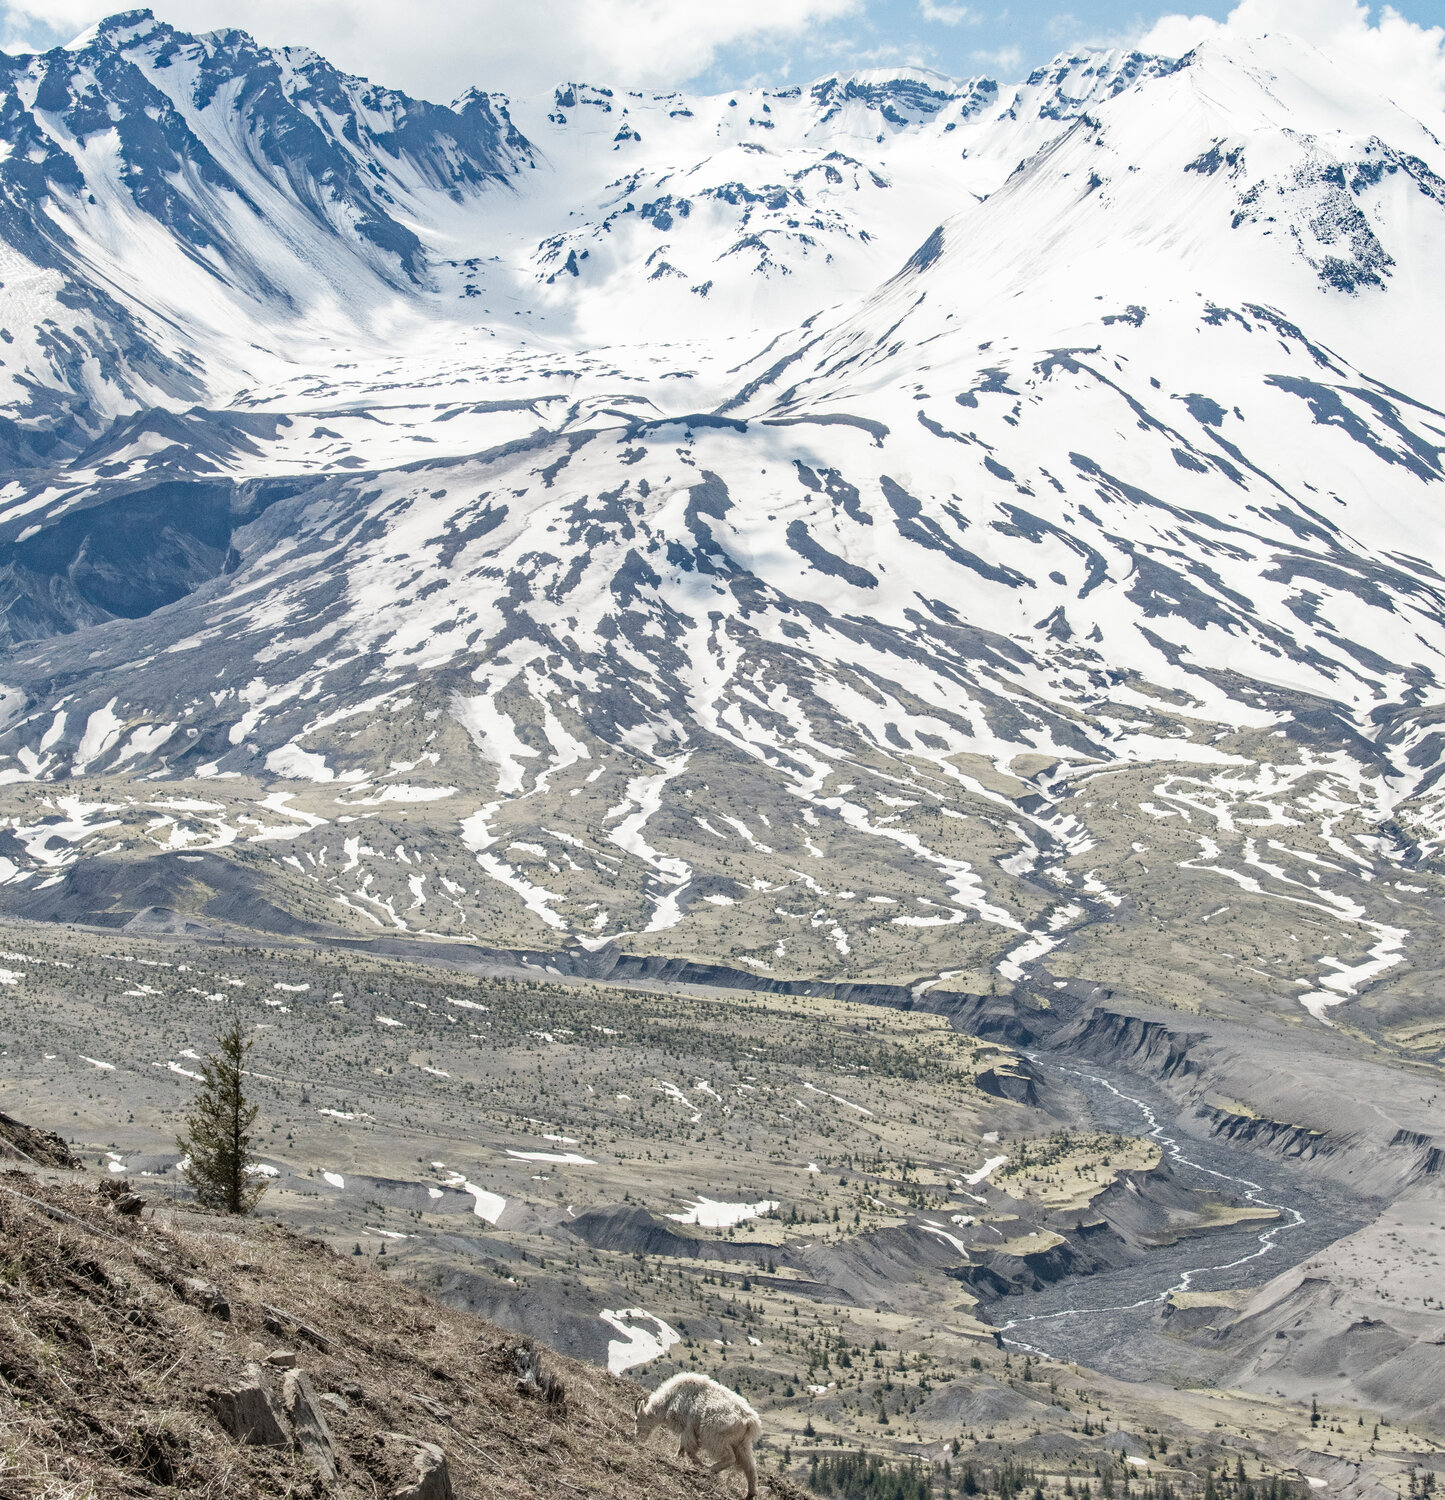 A mountain goat is pictured in front of Mount St. Helens near the Johnston Ridge Observatory on Thursday, May 11.